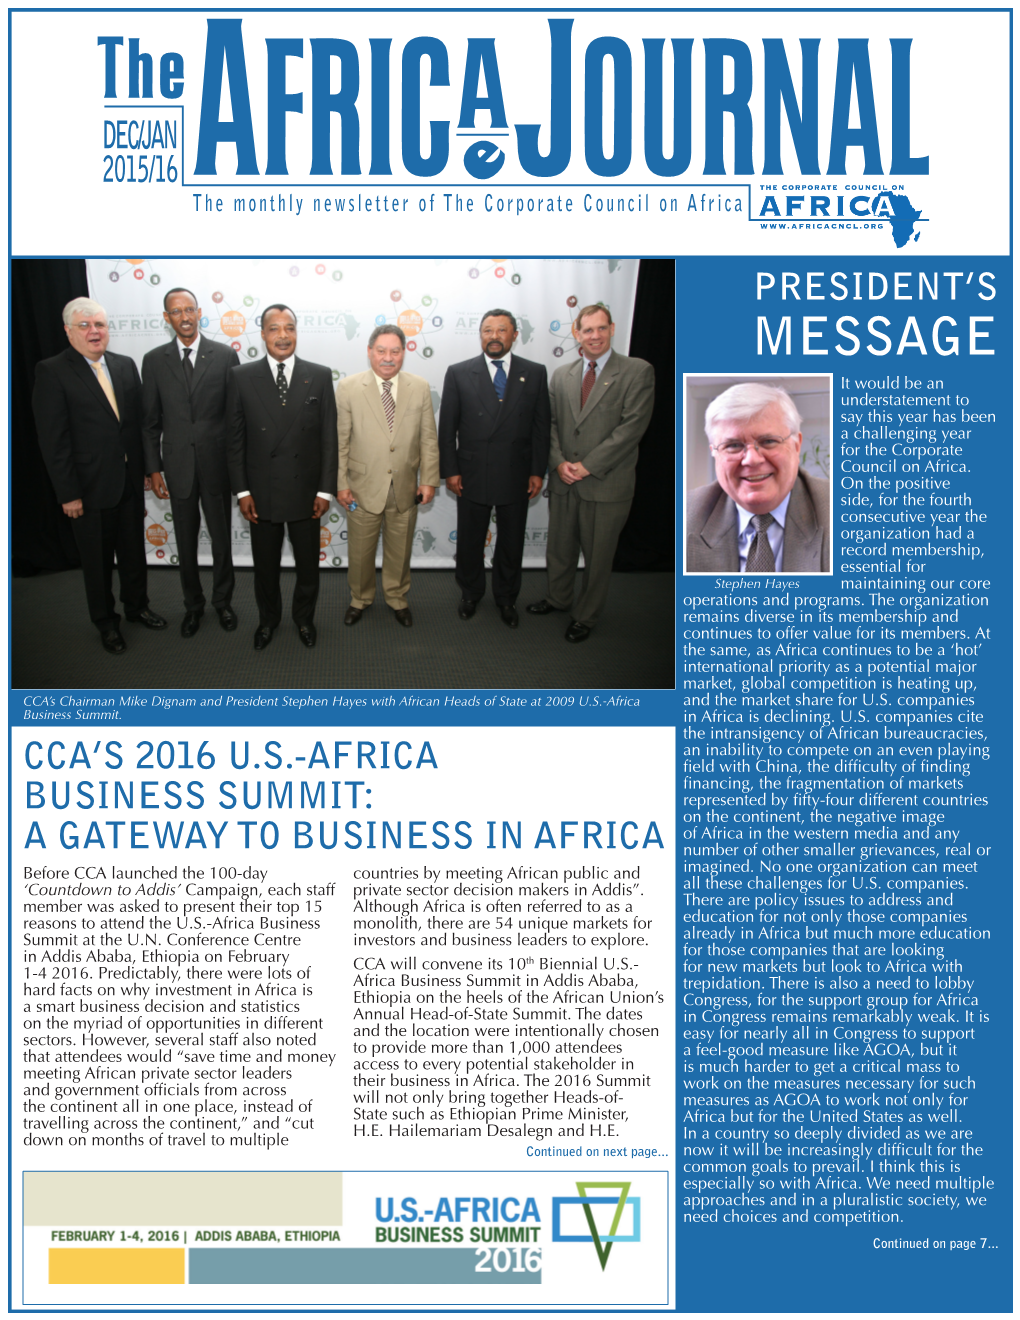 MESSAGE It Would Be an Understatement to Say This Year Has Been a Challenging Year for the Corporate Council on Africa